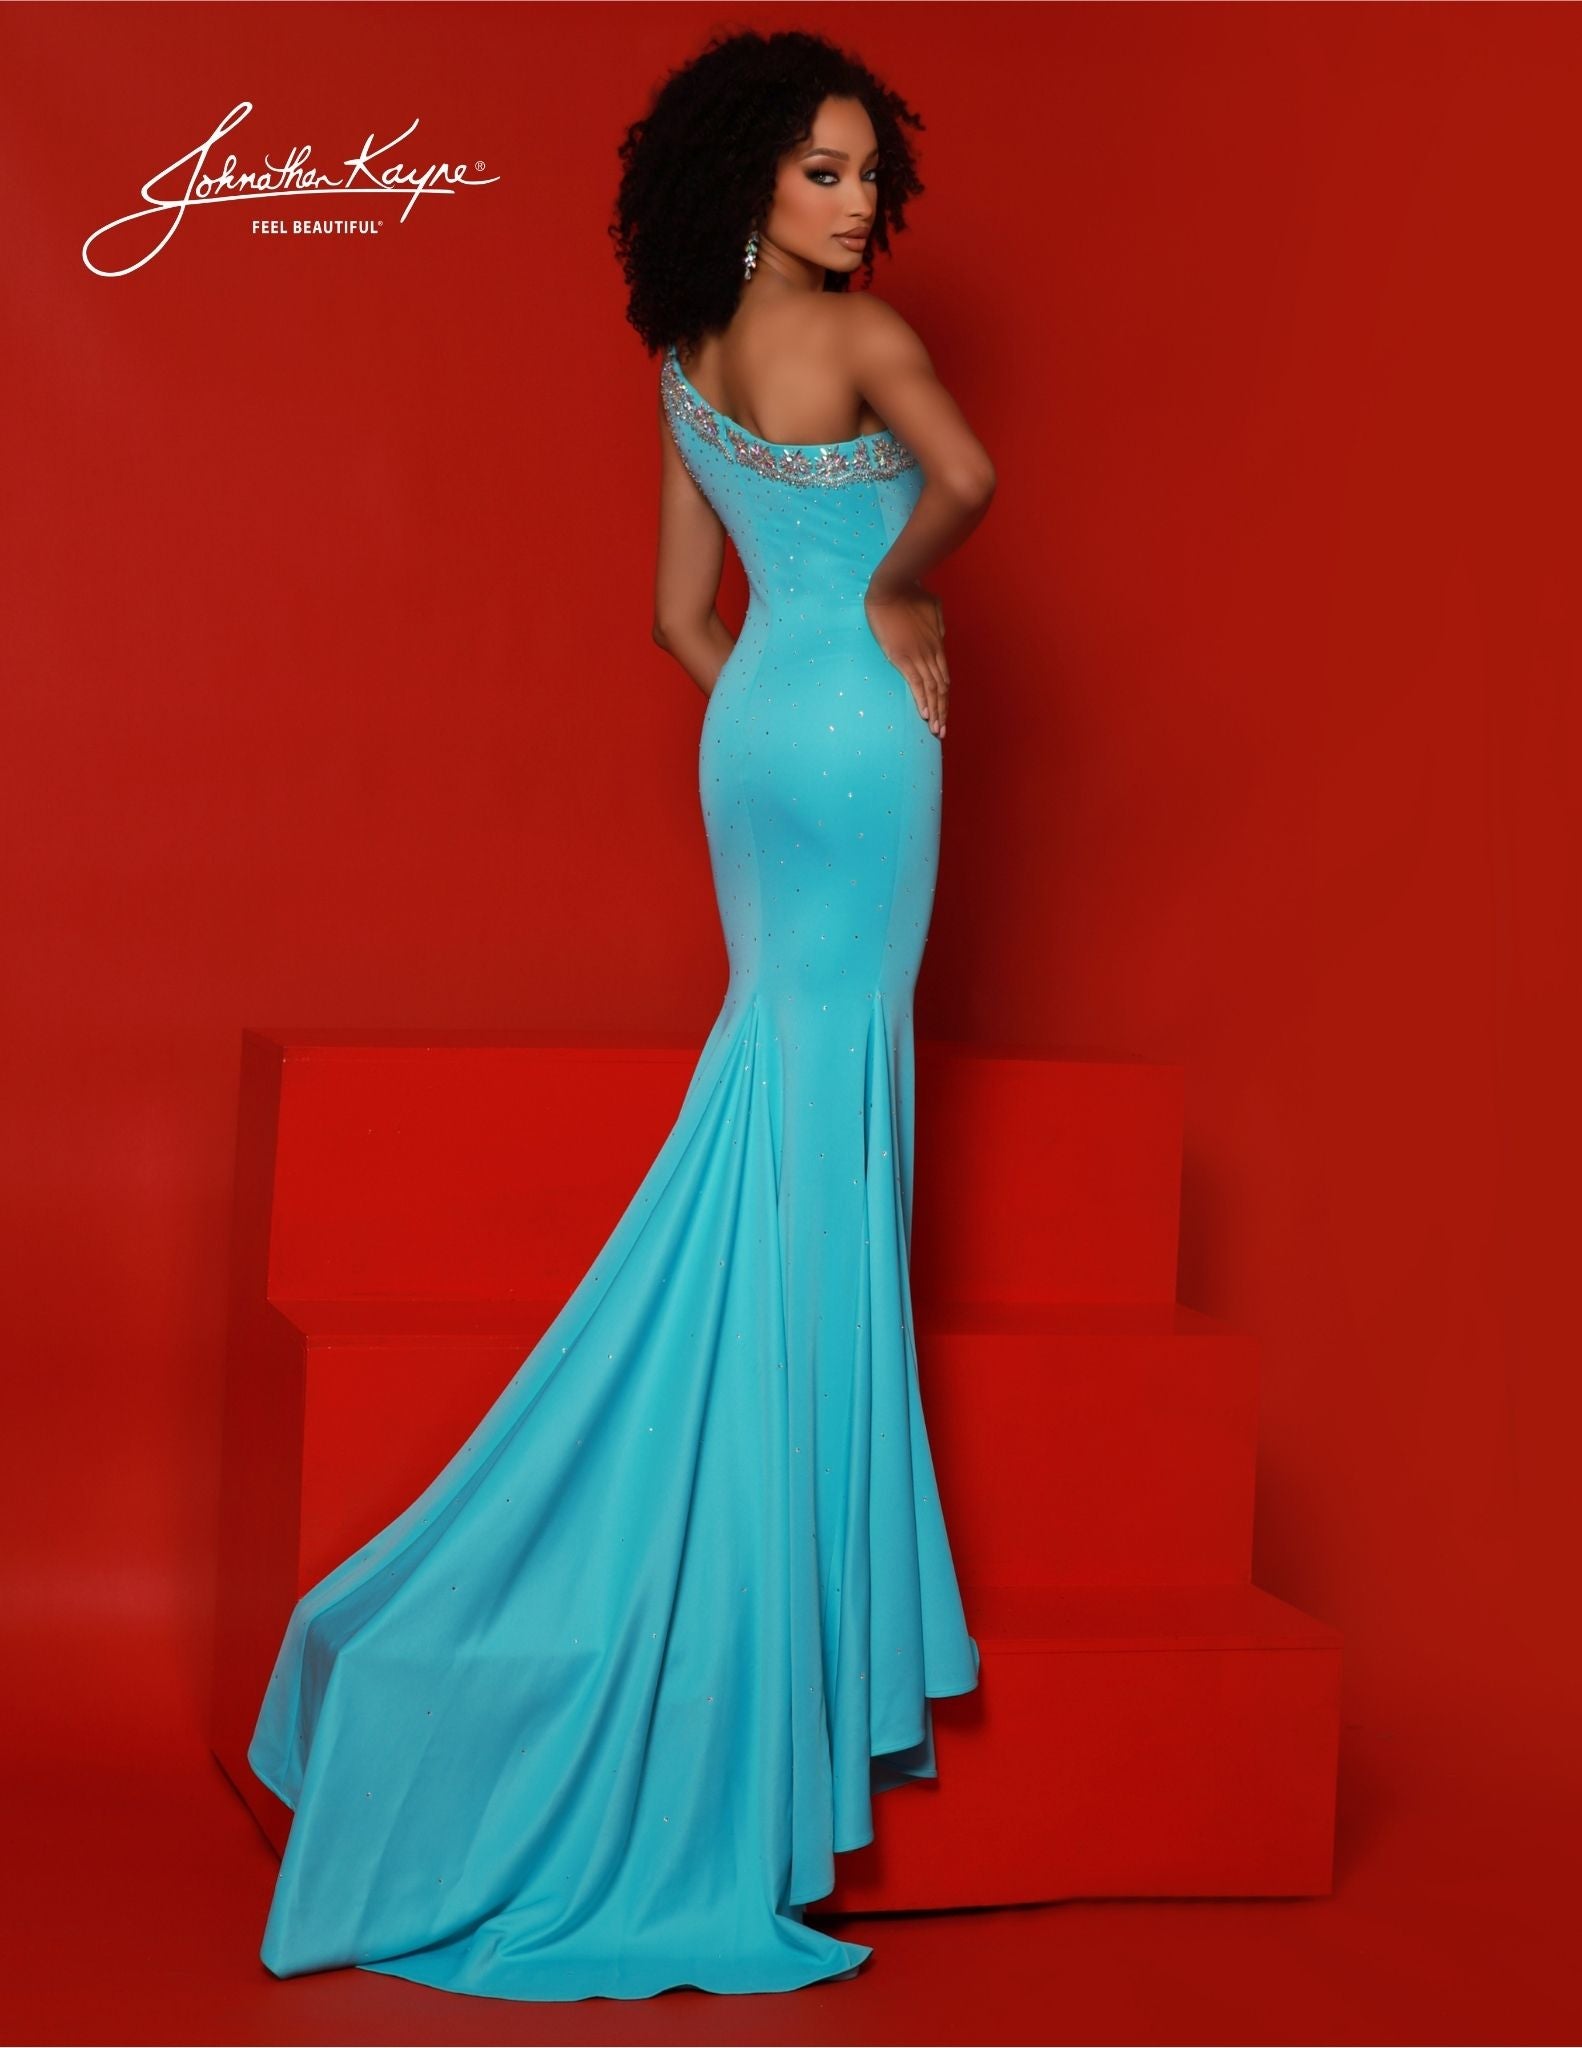 Expertly crafted by renowned designer Johnathan Kayne, this stunning prom dress, pageant gown, or formal evening wear is a must-have for any special occasion. The one shoulder design is embellished with sparkling crystals while the fitted silhouette is complemented by a sultry slit. Elevate your style and make a statement with this unique and elegant dress.